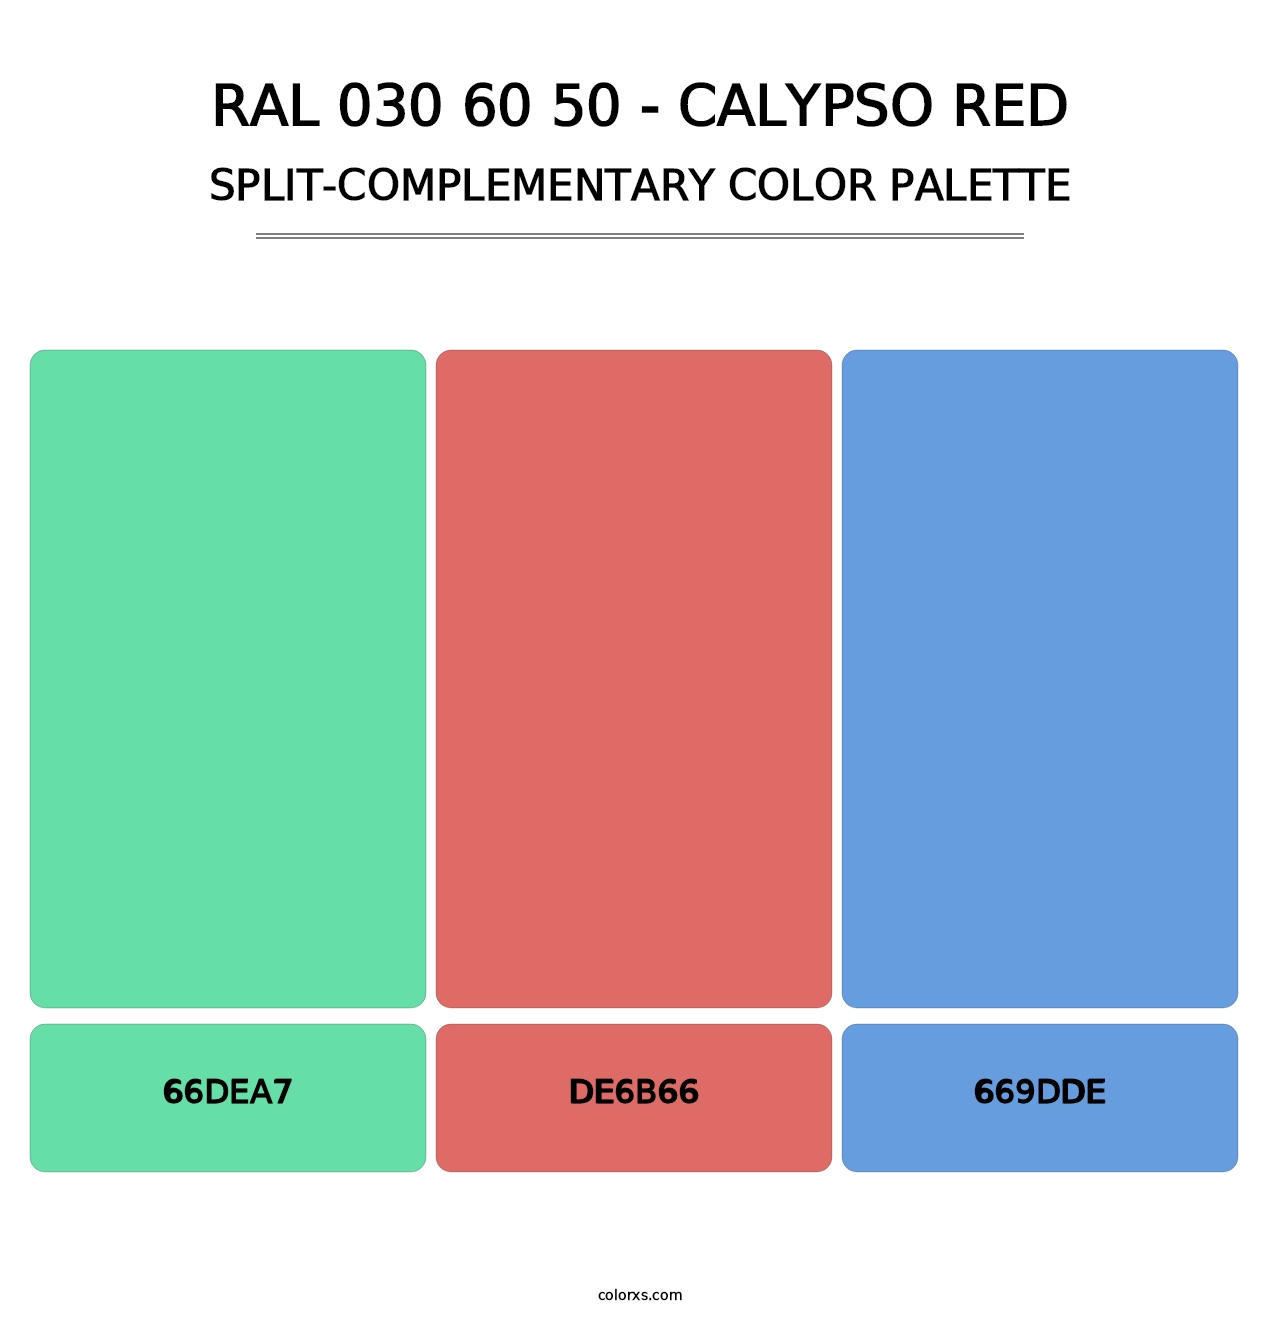 RAL 030 60 50 - Calypso Red - Split-Complementary Color Palette